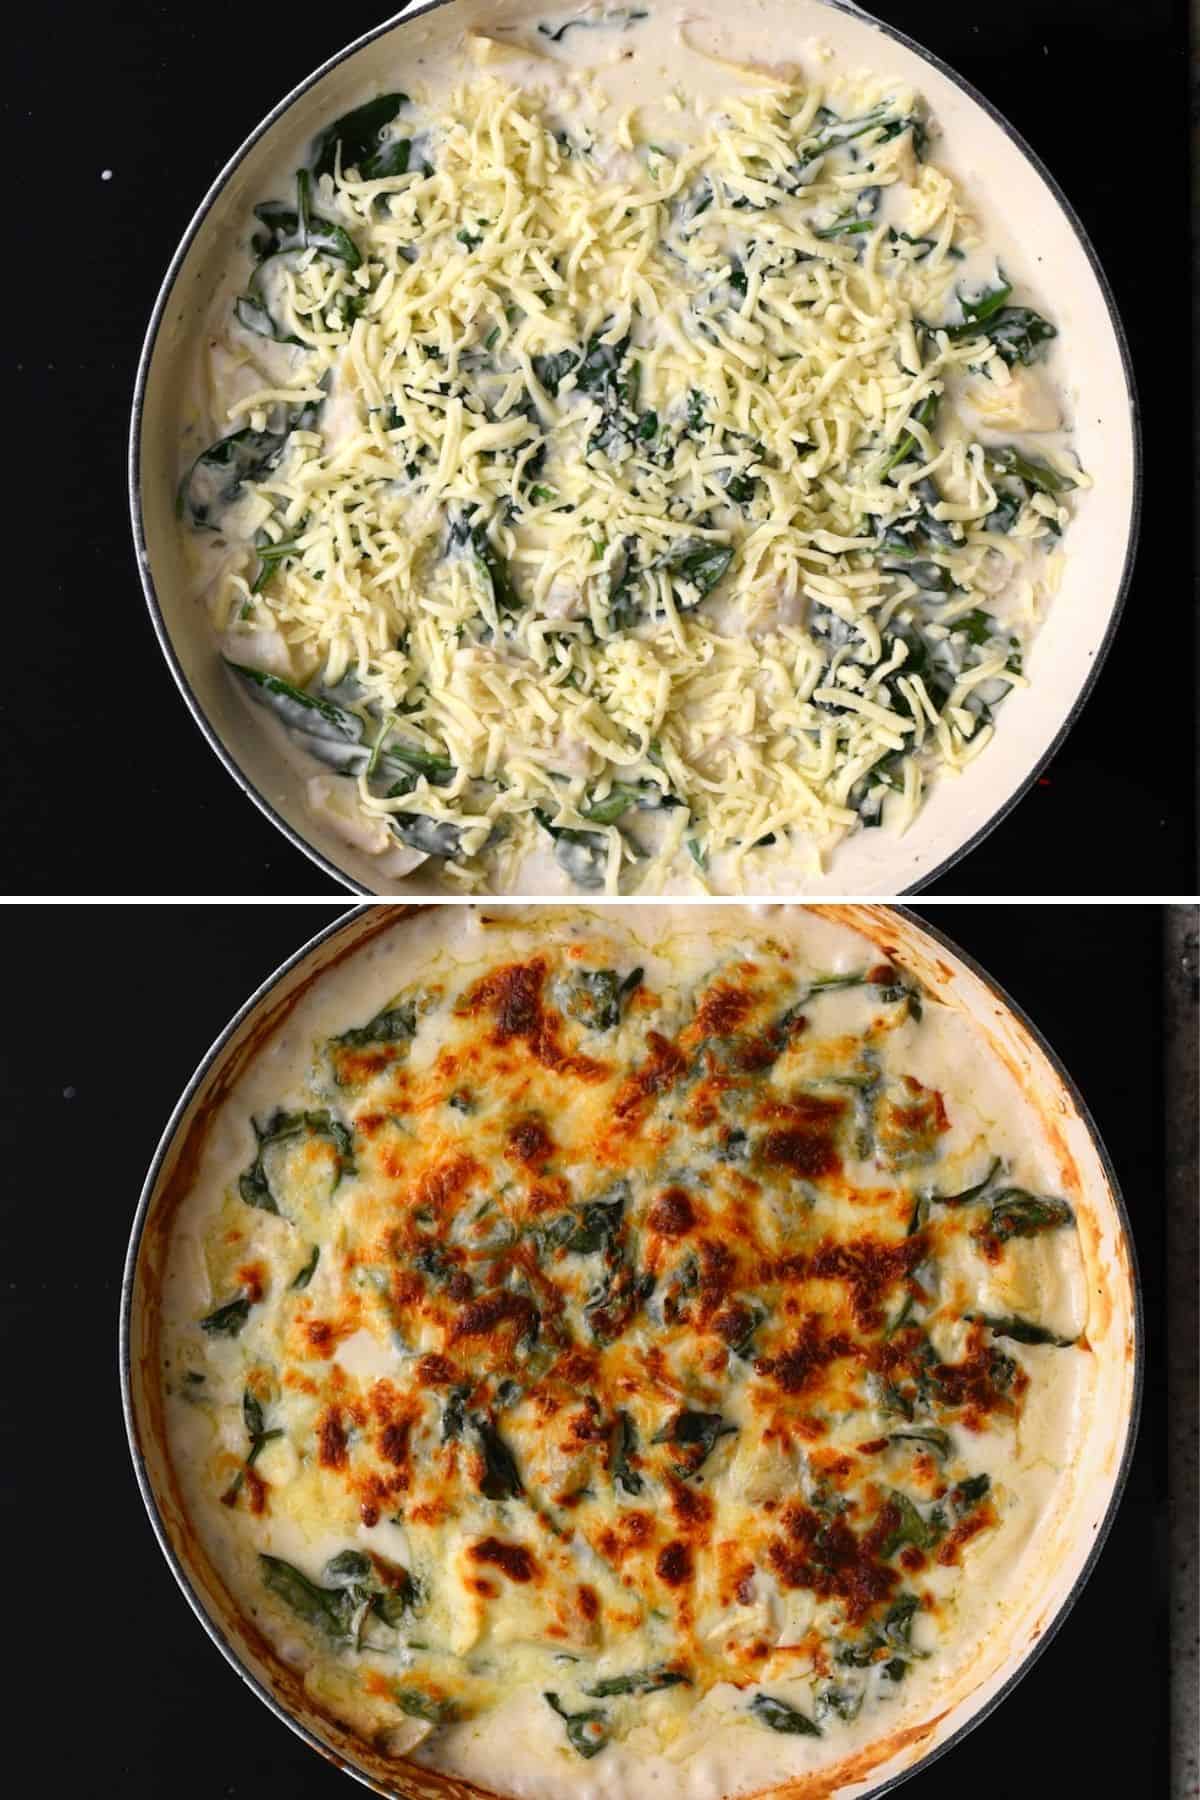 Before and after roasting spinach artichoke dip